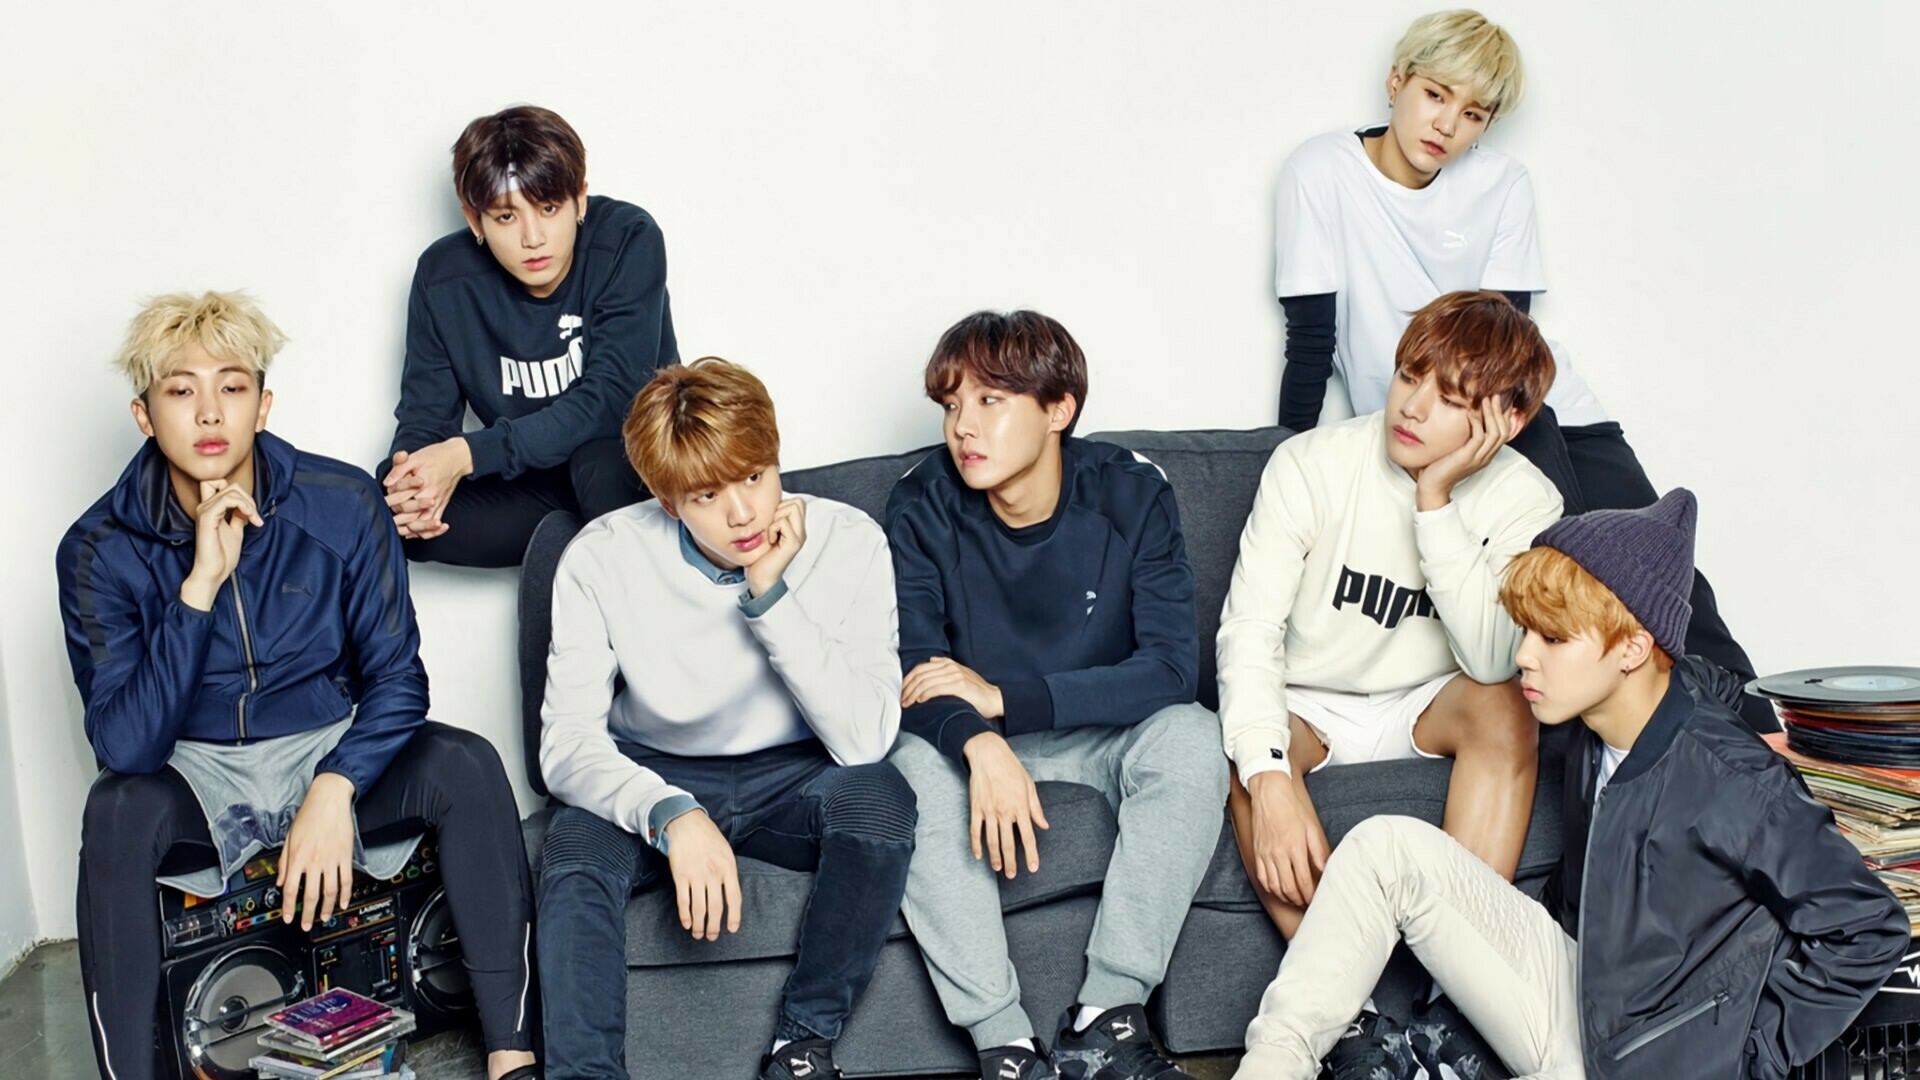 BTS wallpapers, HD and 4K resolution, For PC and mobile, Stunning images, 1920x1080 Full HD Desktop